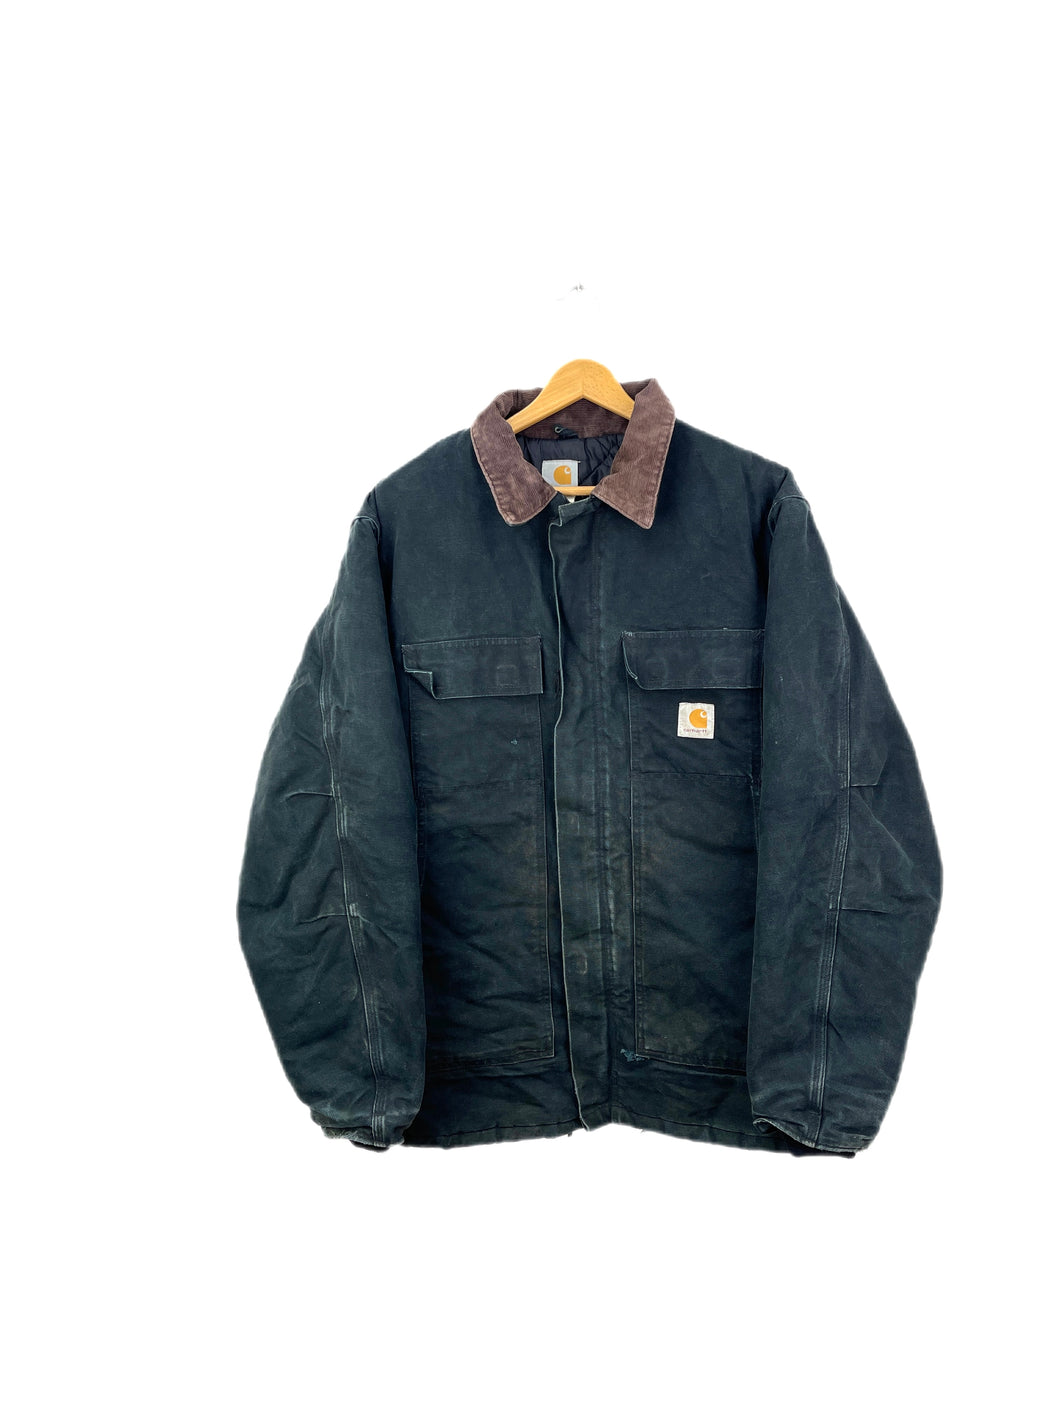 Carhartt Quilted Artic Jacket - XLarge